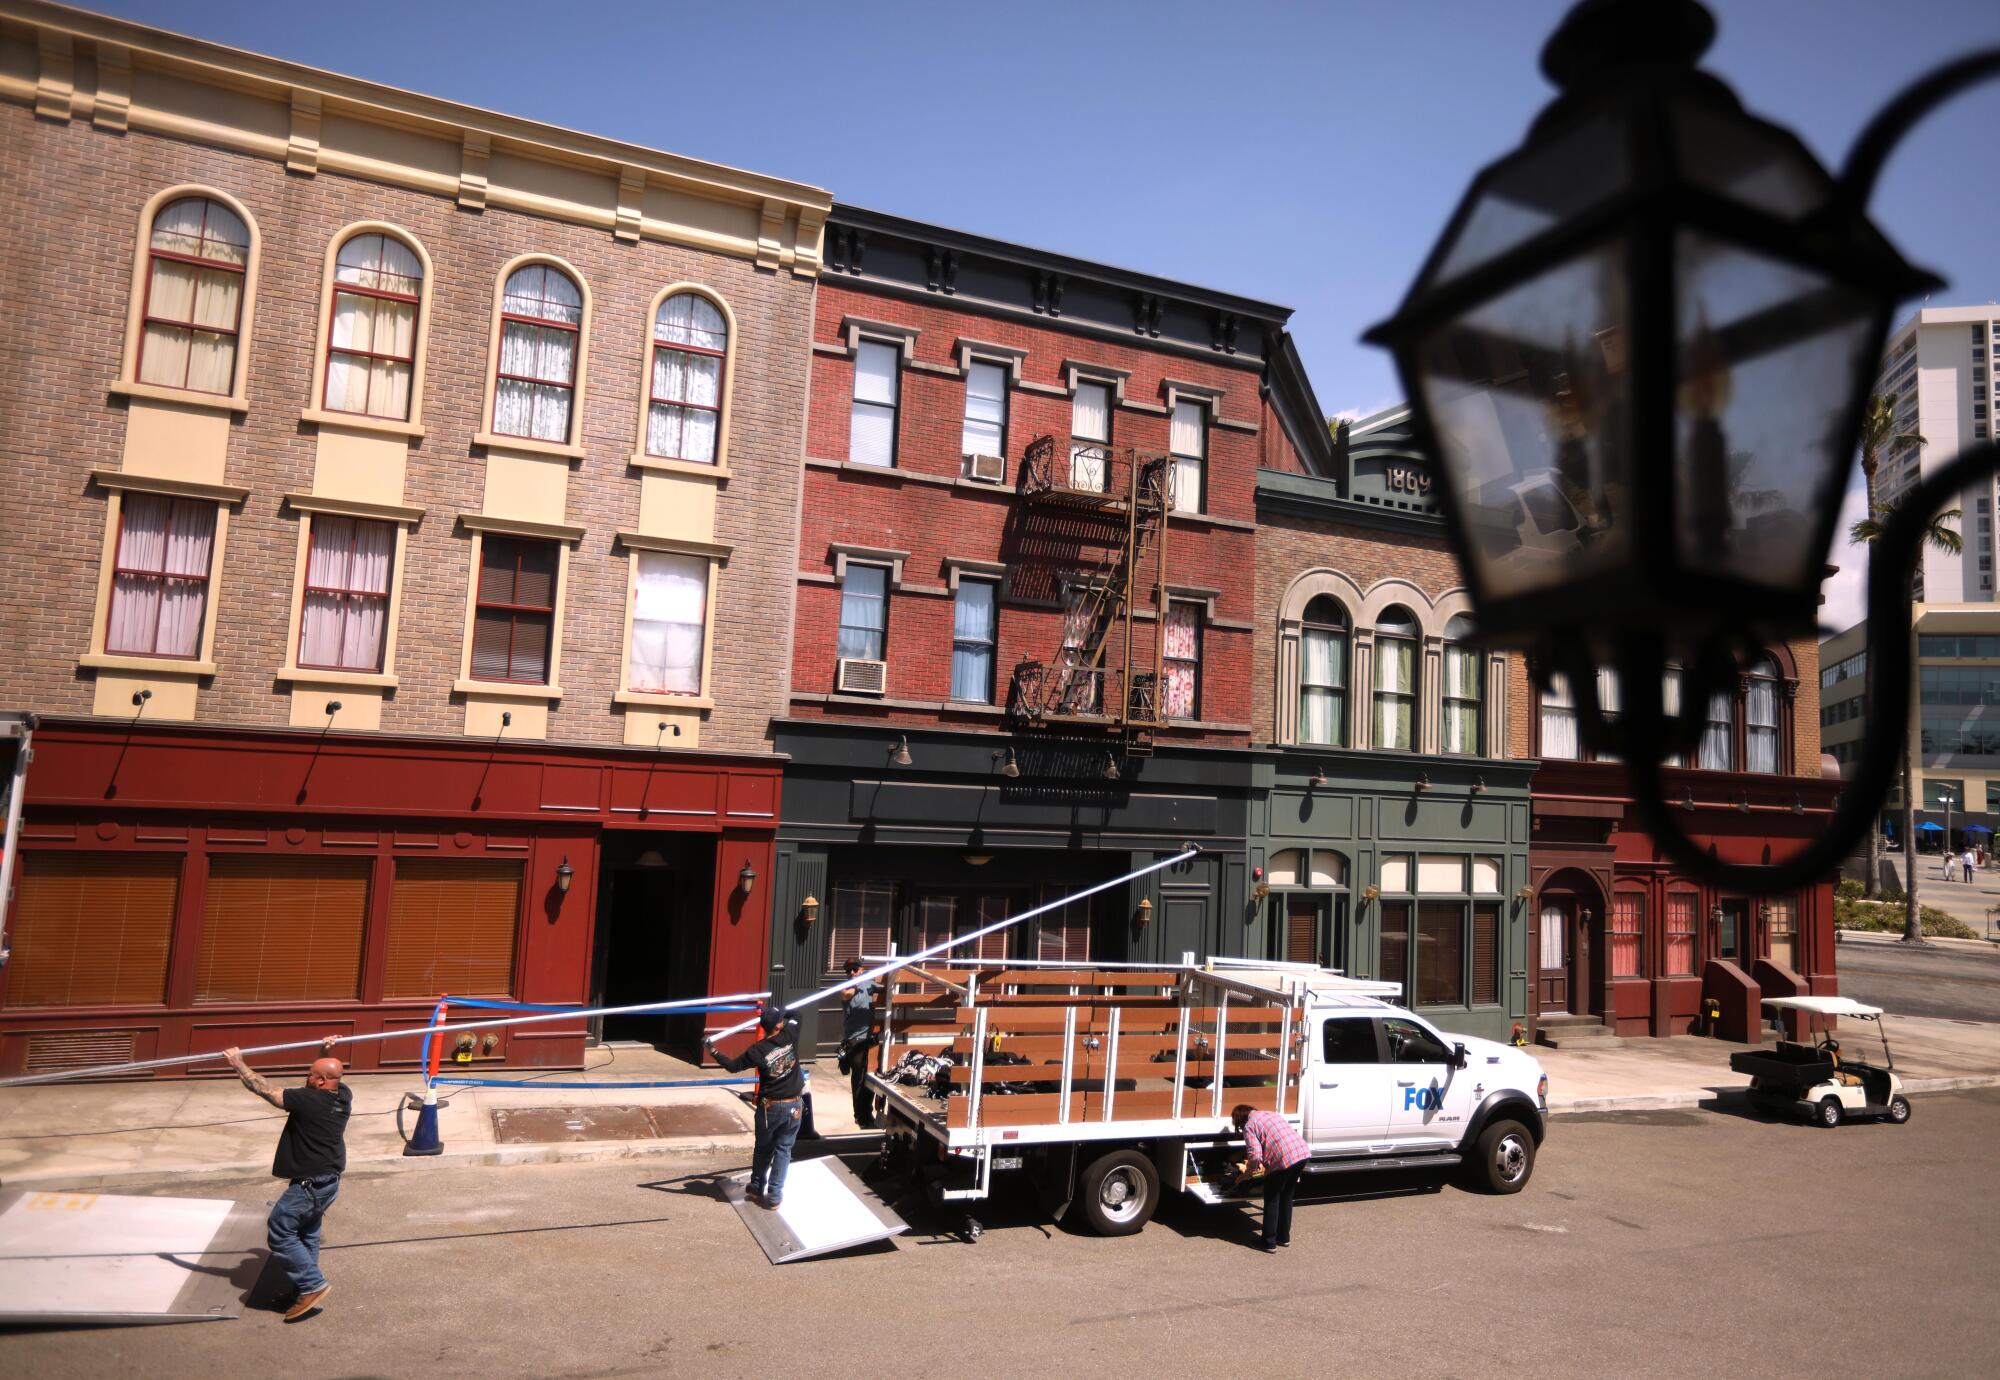 A film crew unloads a truck as they get ready for a shoot at the new New York set at Fox Studios in Los Angeles.